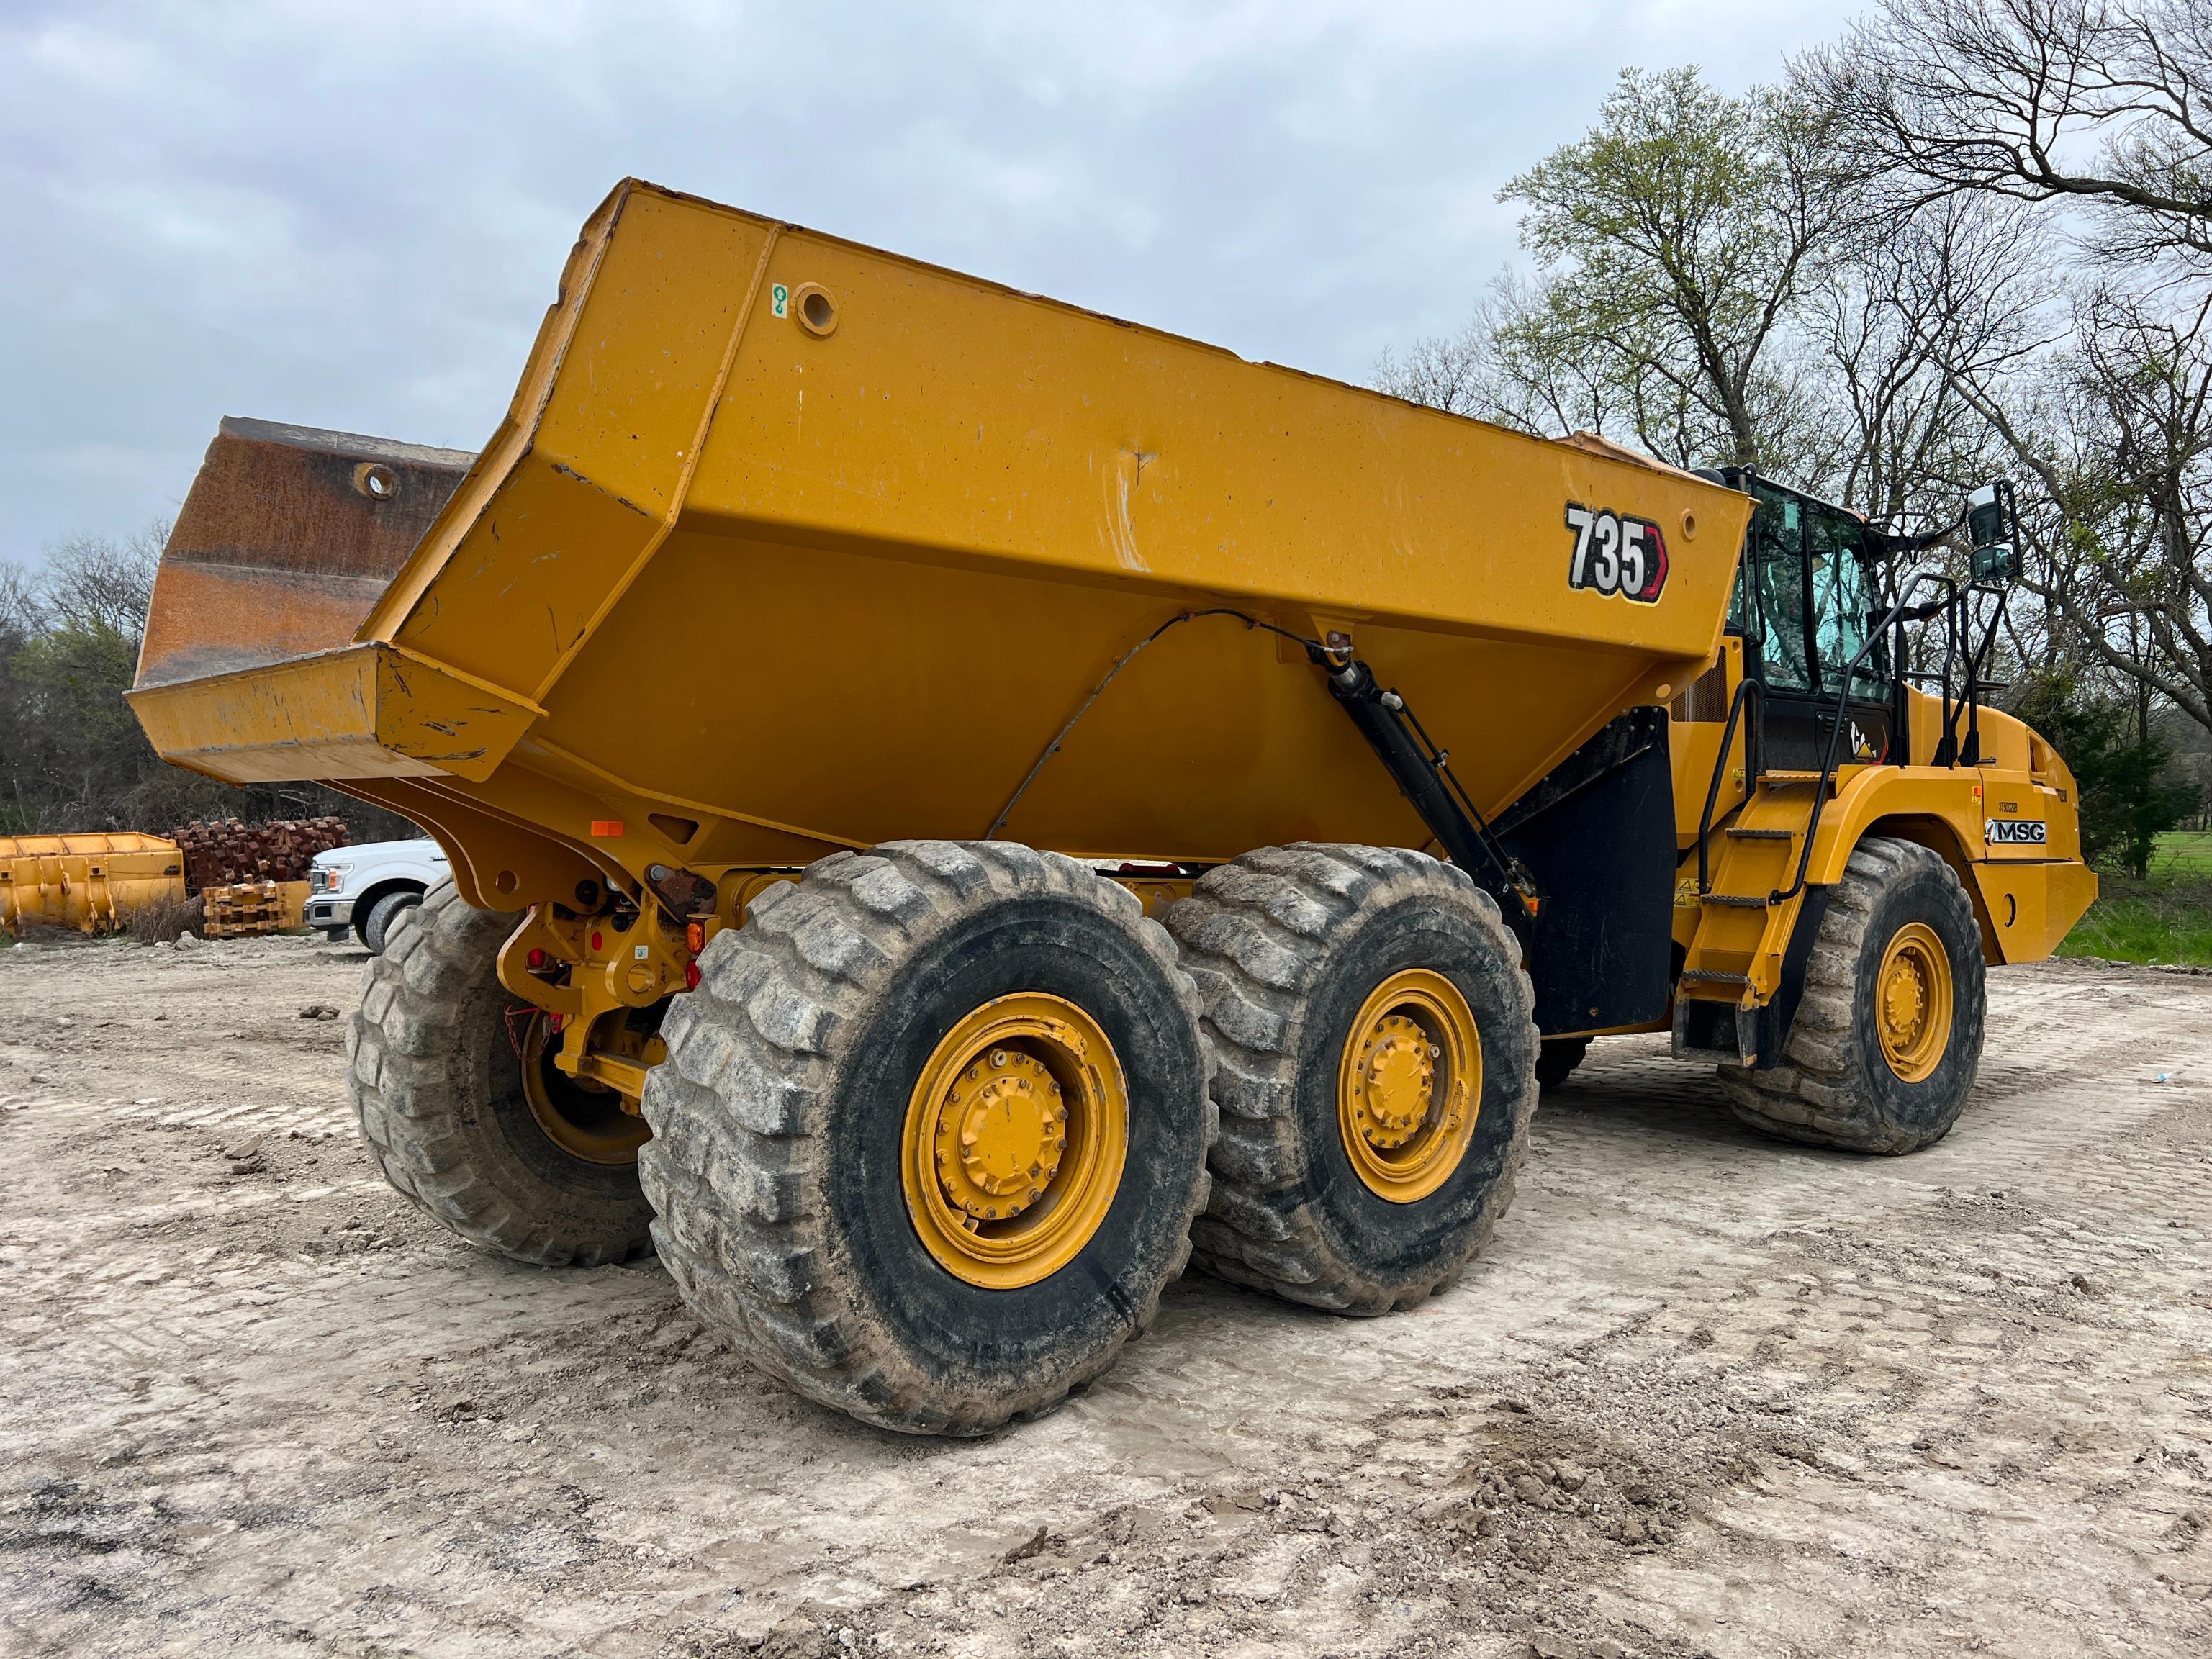 2021 CAT 735 ARTICULATED HAUL TRUCK SN:CAT00735E3T500298 6x6, powered by Cat diesel engine, equipped